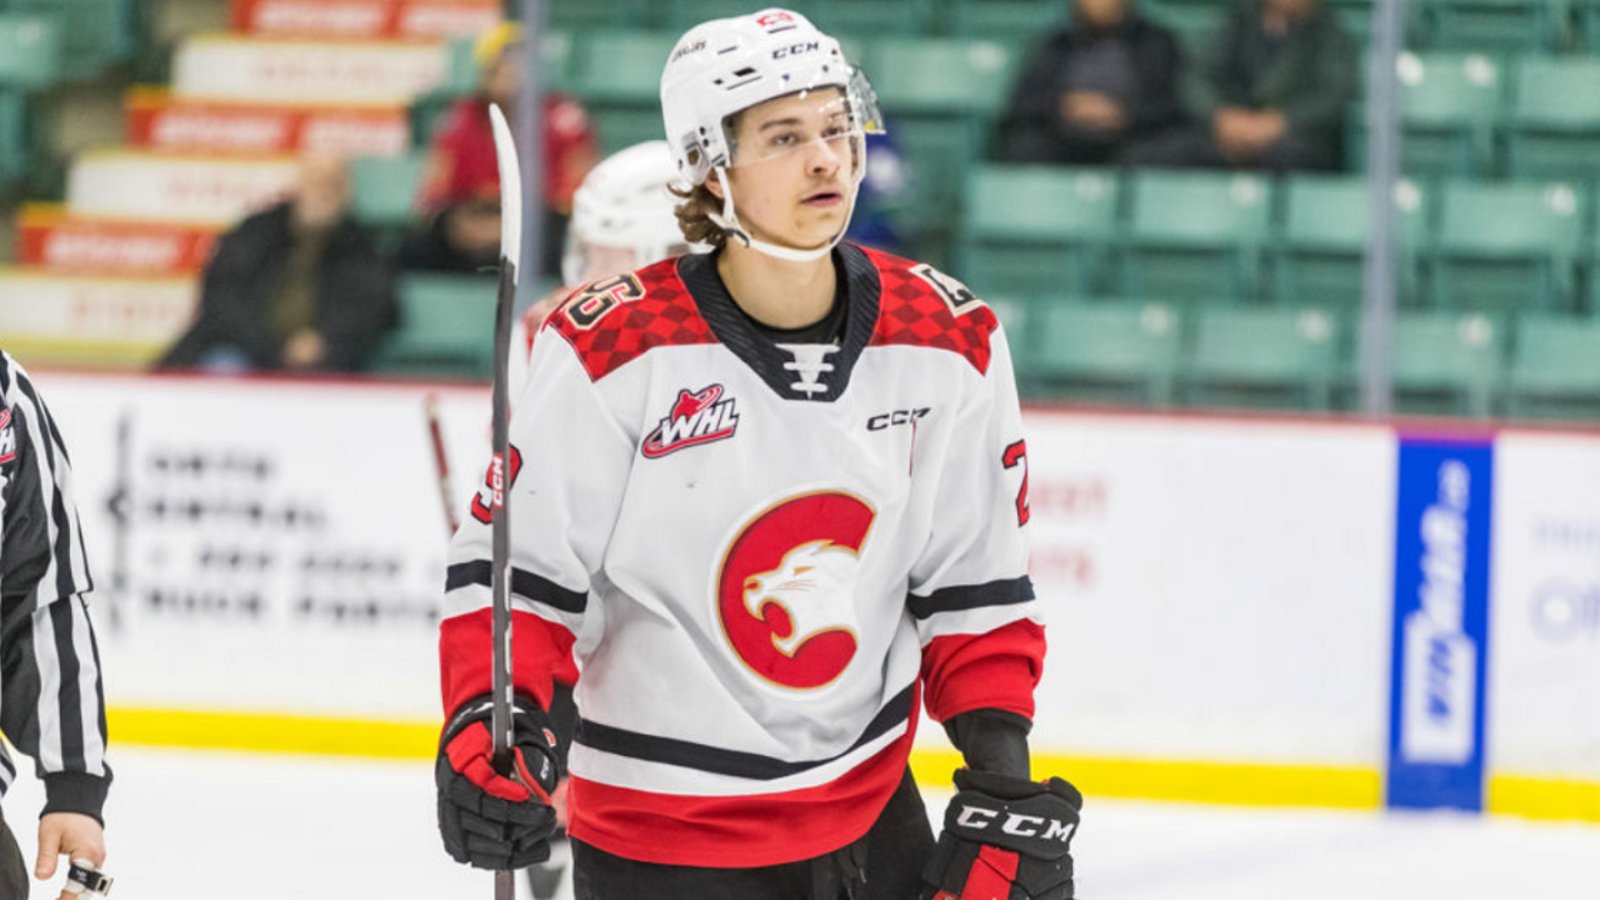 Chase Wheatcroft signs NHL deal after 104 point season in the WHL.